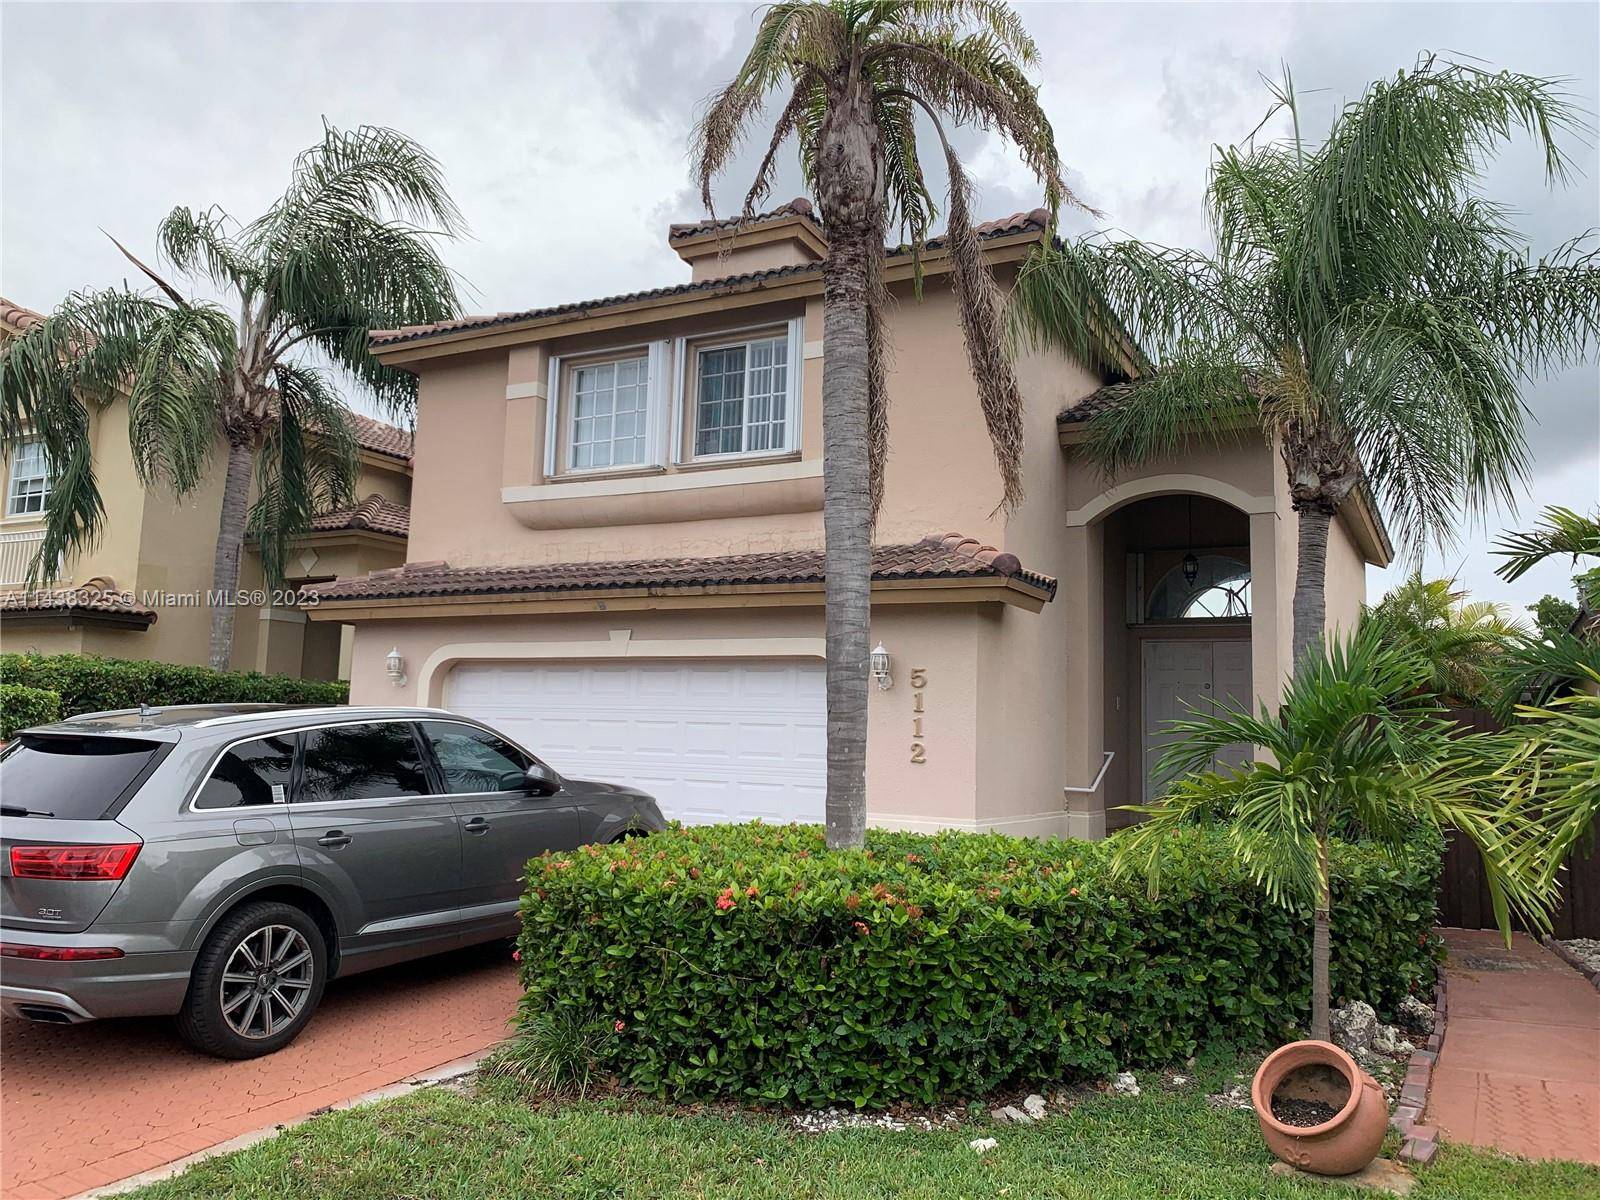 Beautiful 4 bedrooms 2. 5 bathrooms single family home located in the gated community of Doral Landing East.